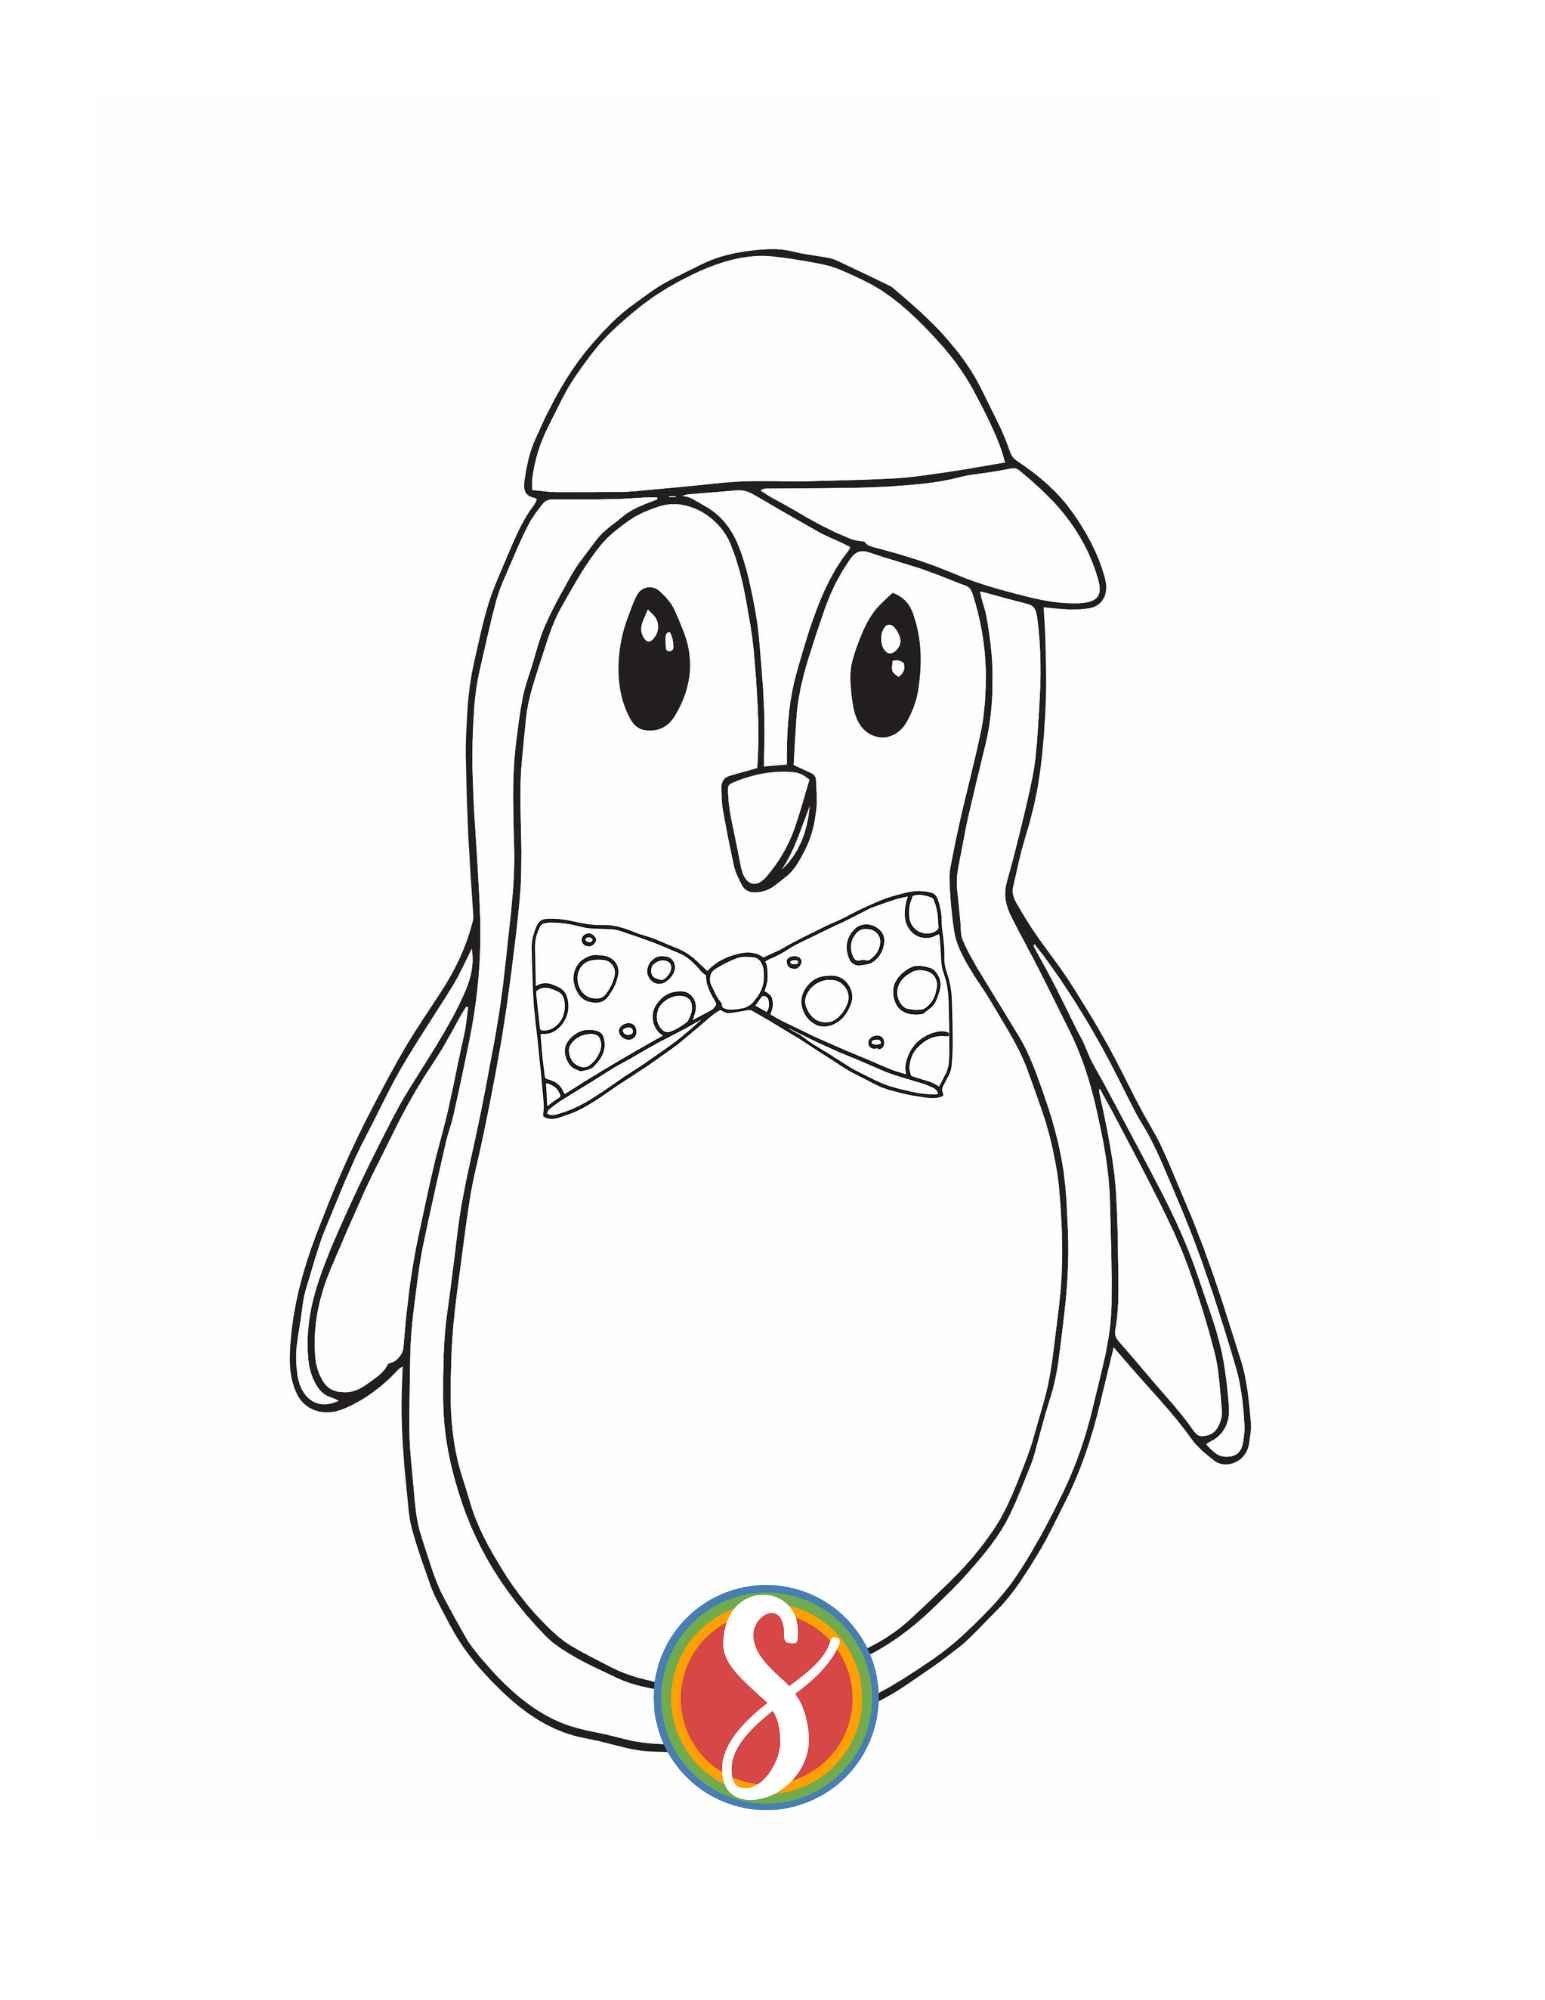 a simple cute penguin image coloring page. The penguin is wearing a colorable bowtie and hat.